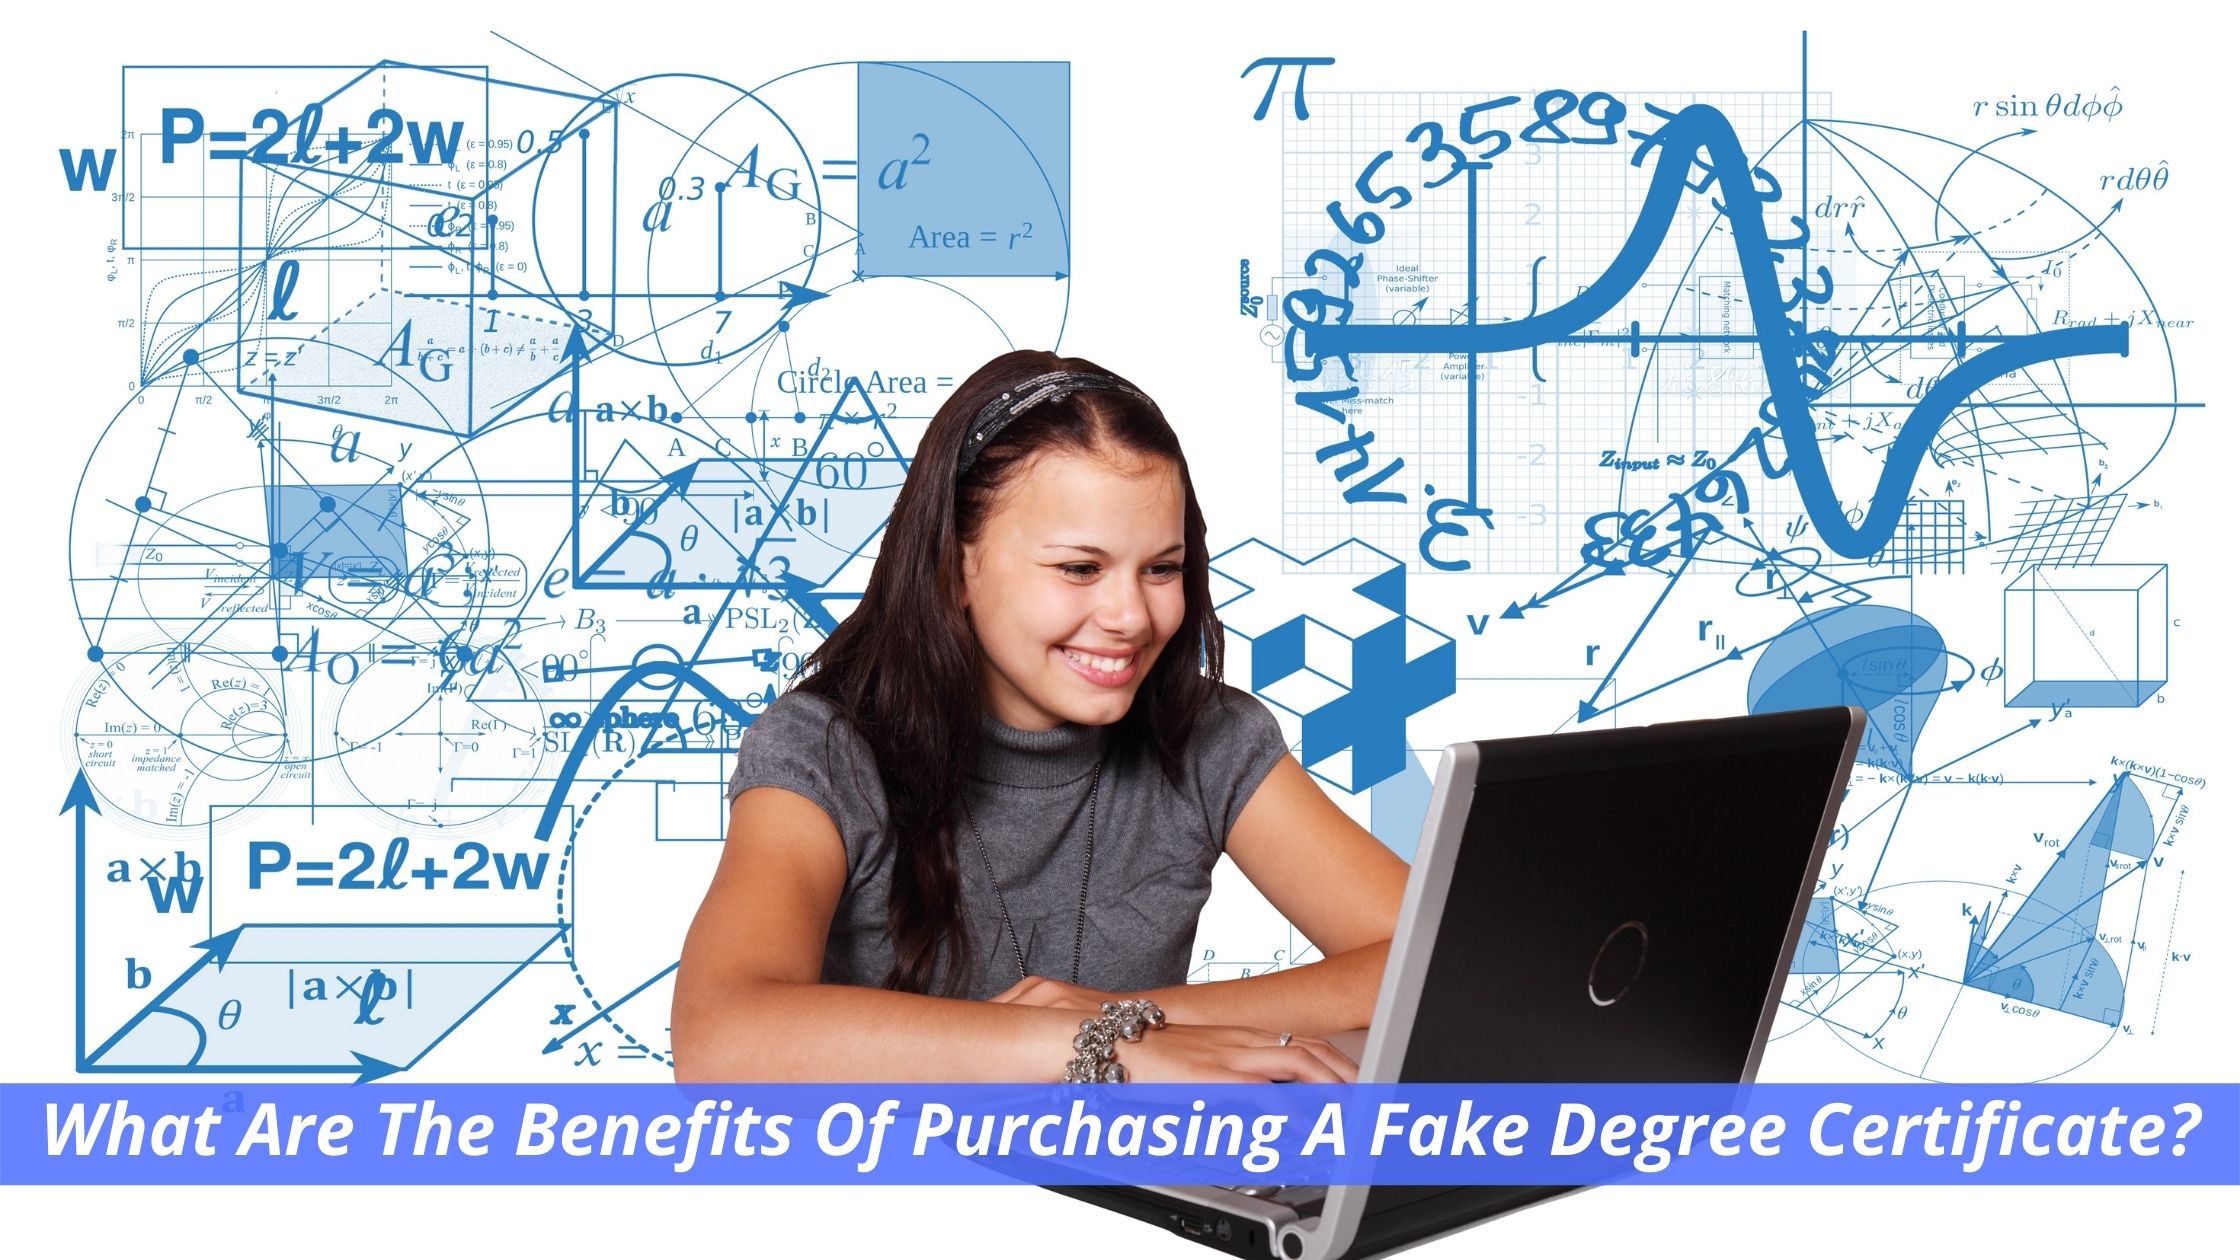 What Are The Benefits Of Purchasing A Fake Degree Certificate?